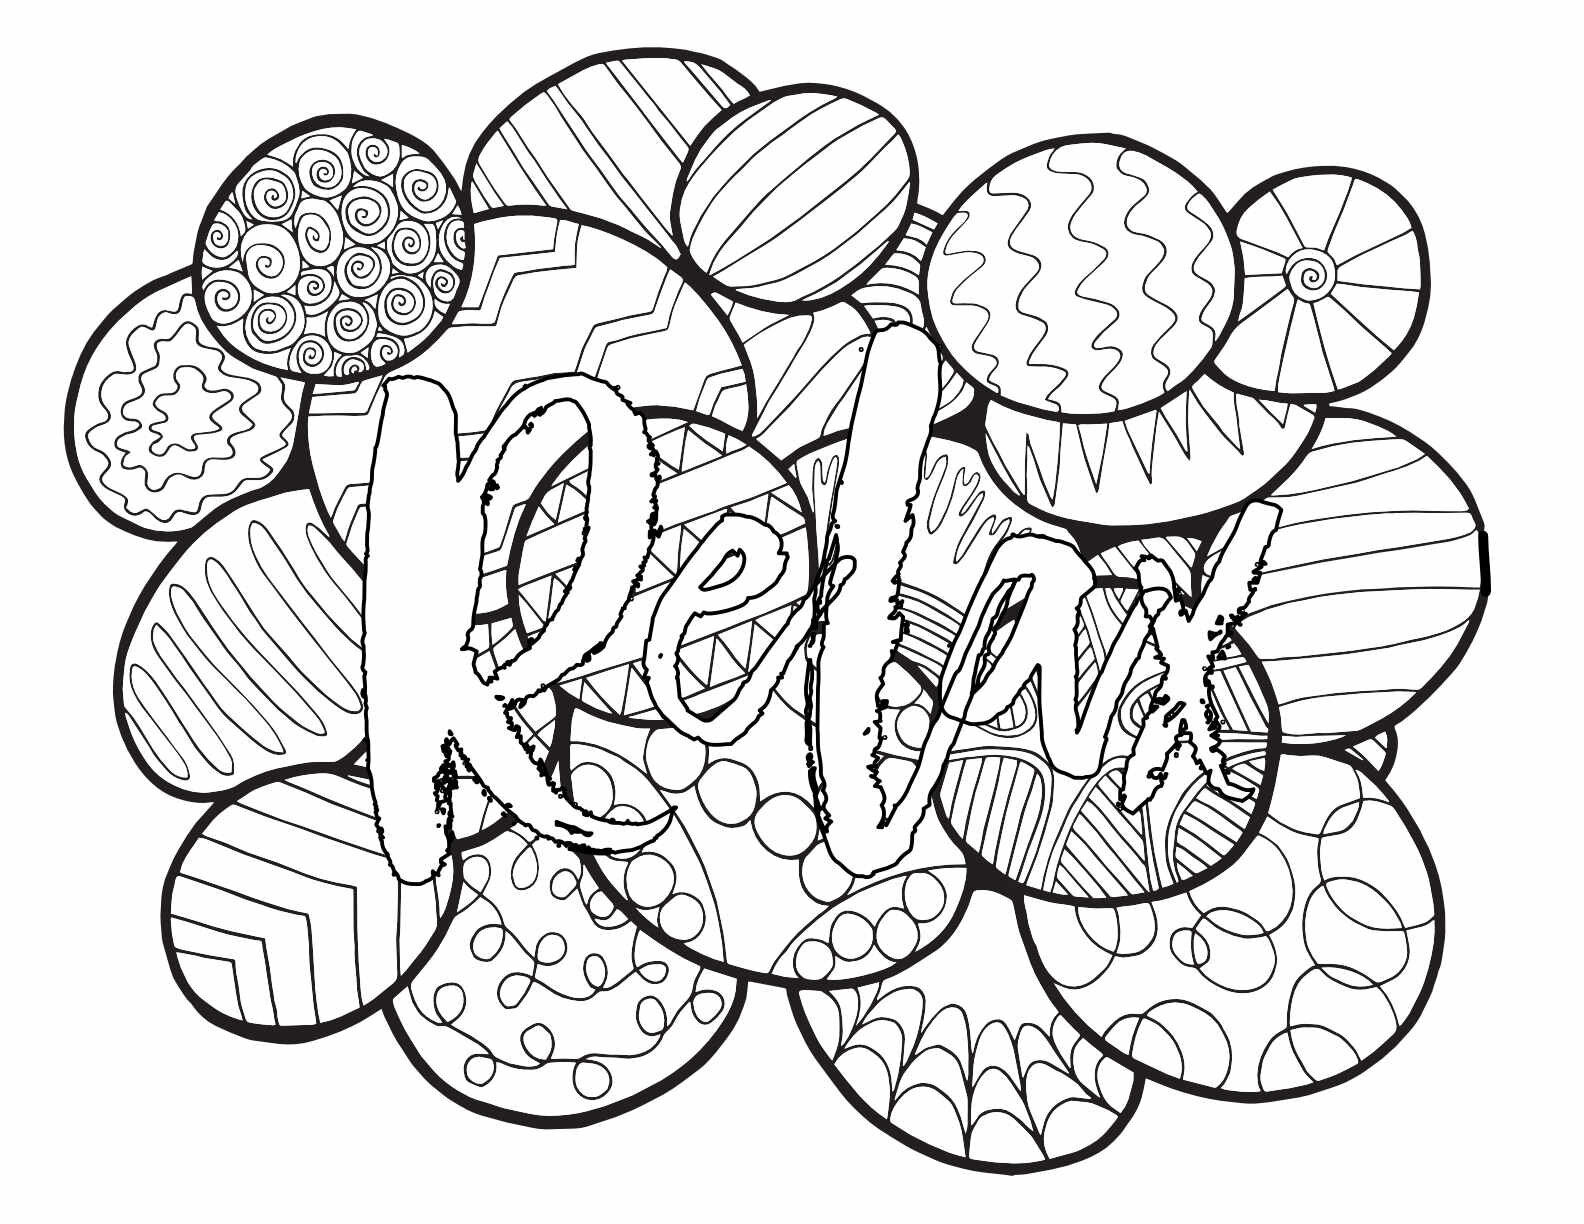 3 FREE RELAX PRINTABLE COLORING PAGES CLICK HERE TO DOWNLOAD THE PAGE ABOVE